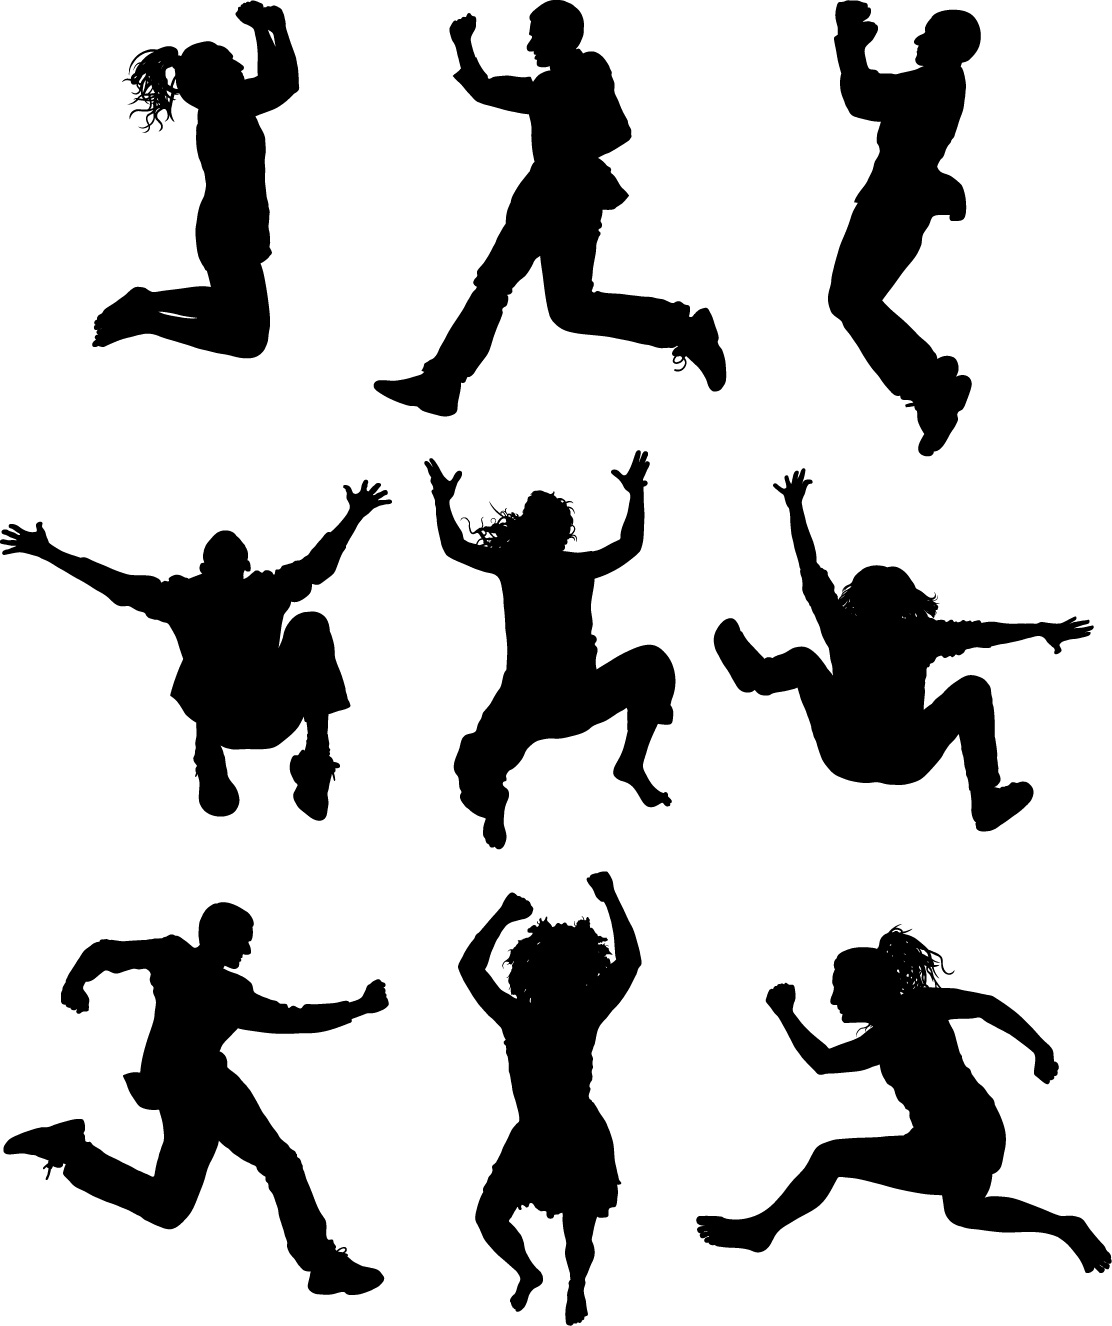 Zumba dancer clipart free images 2 2